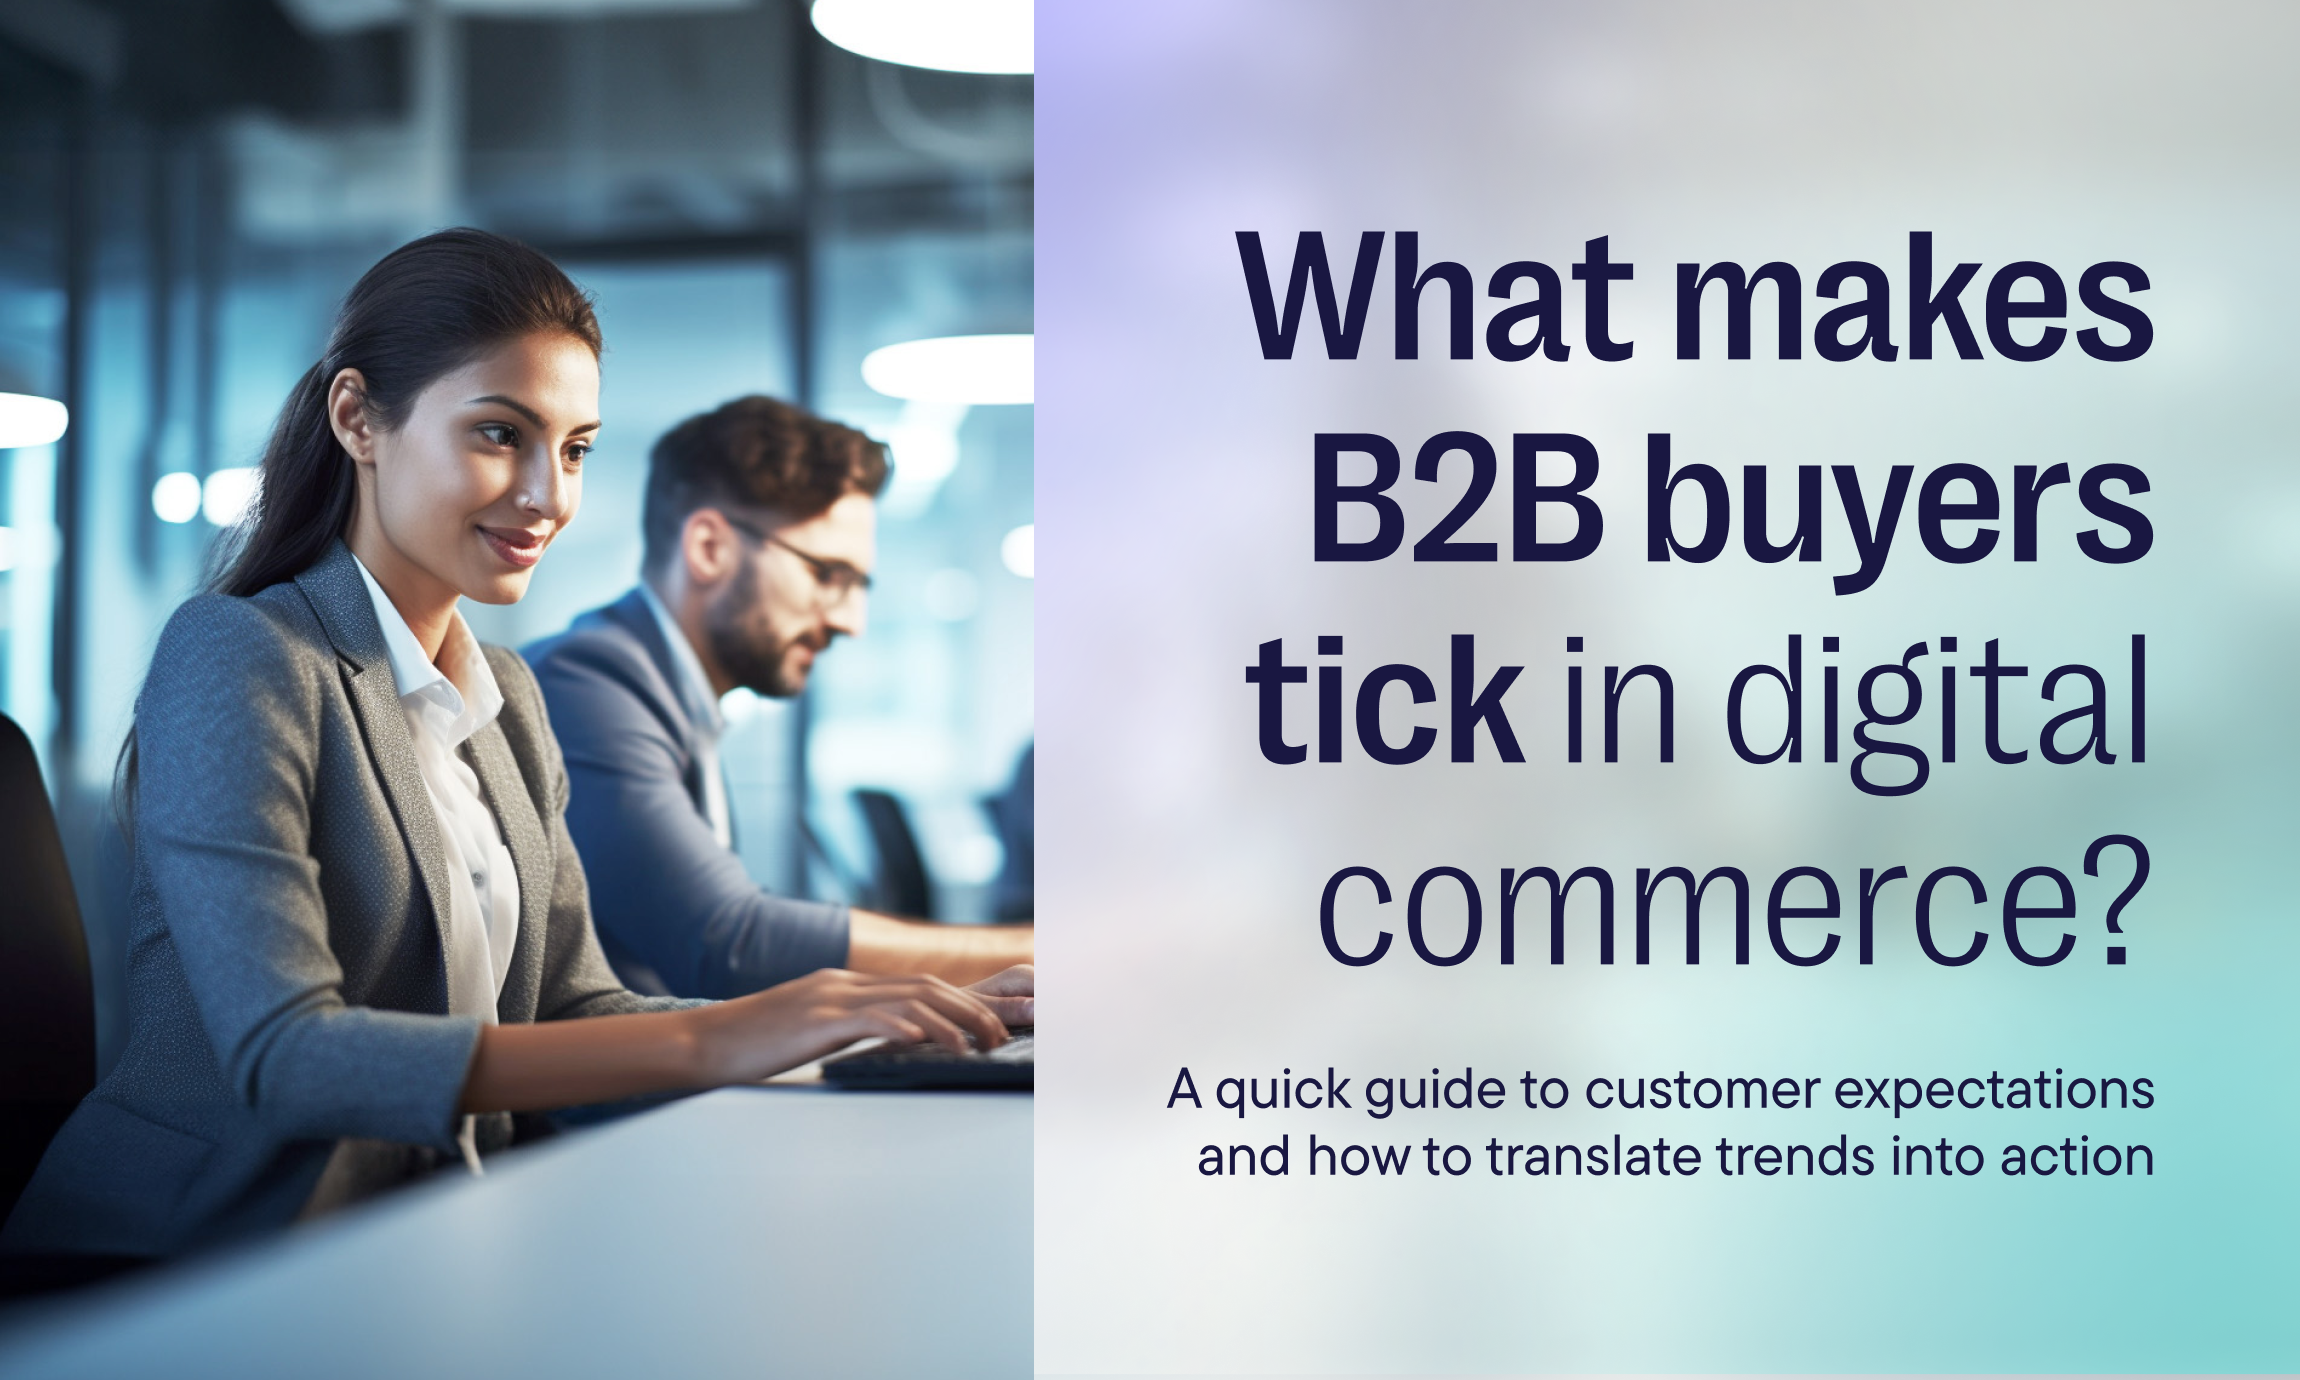 What makes B2B buyers tick in digital commerce: An infographic